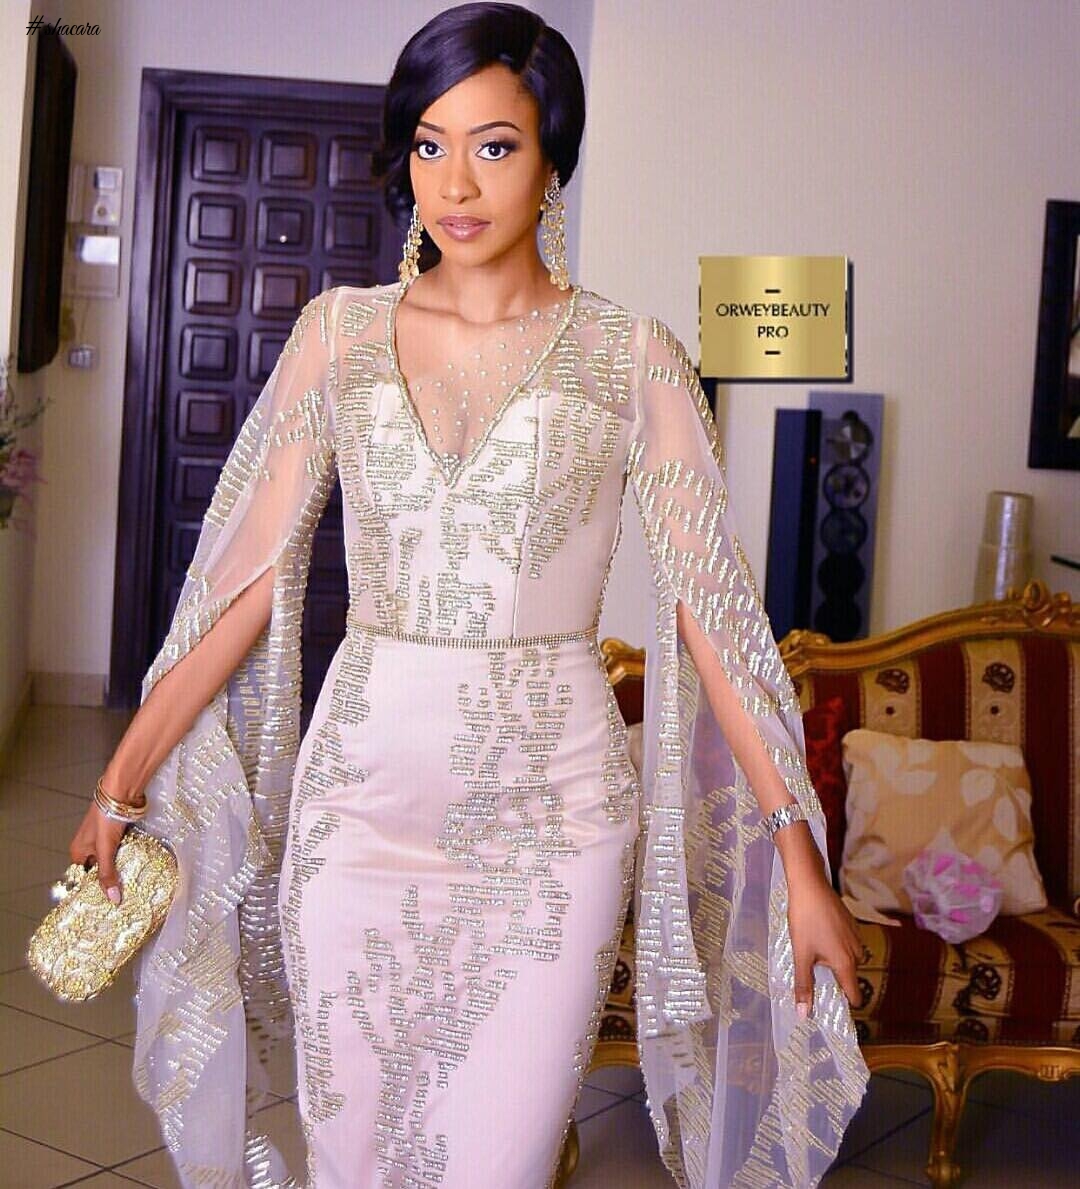 BEAUTIFUL ASO EBI STYLES WE SAW IN THE MONTH OF OCTOBER 2016.